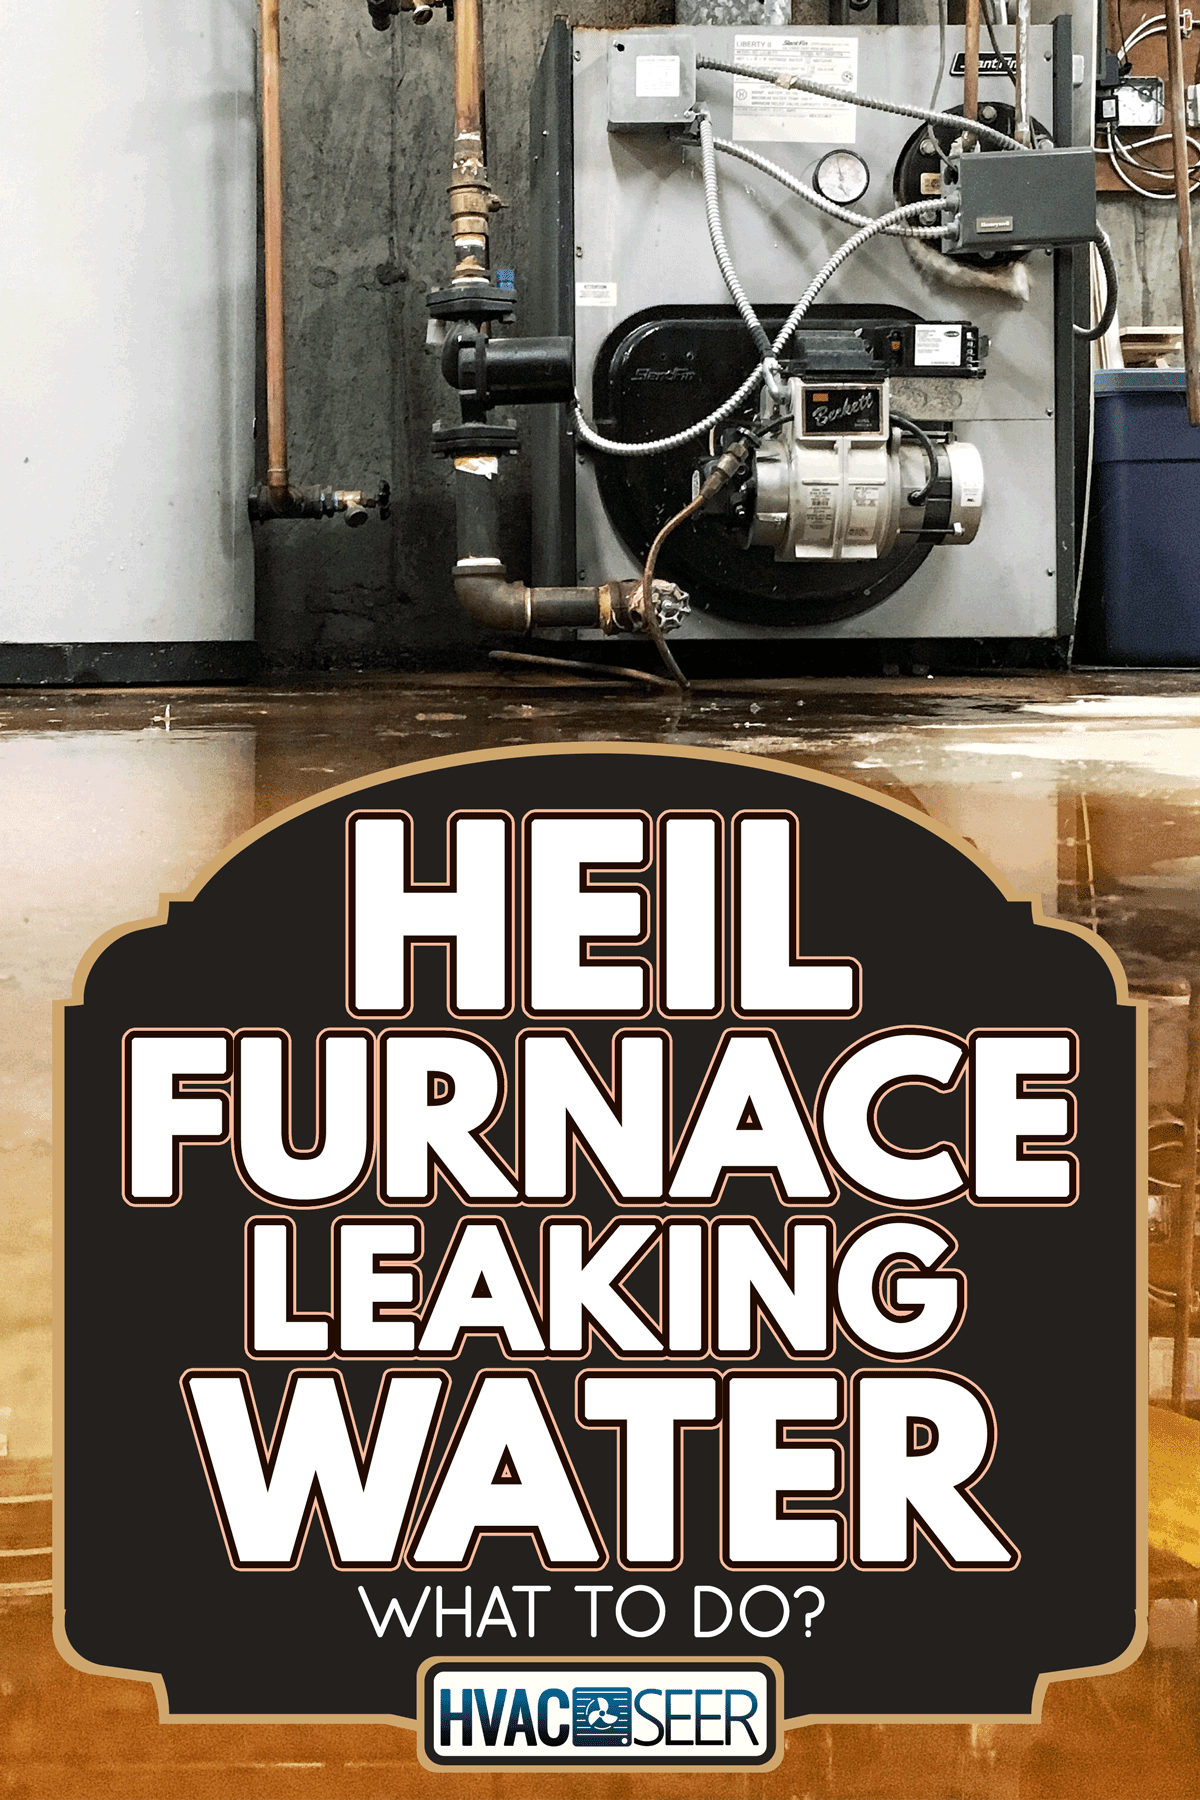 Burst pipe at the furnace and water tank caused a leak on the basement floor of a house, Heil Furnace Leaking Water - What To Do